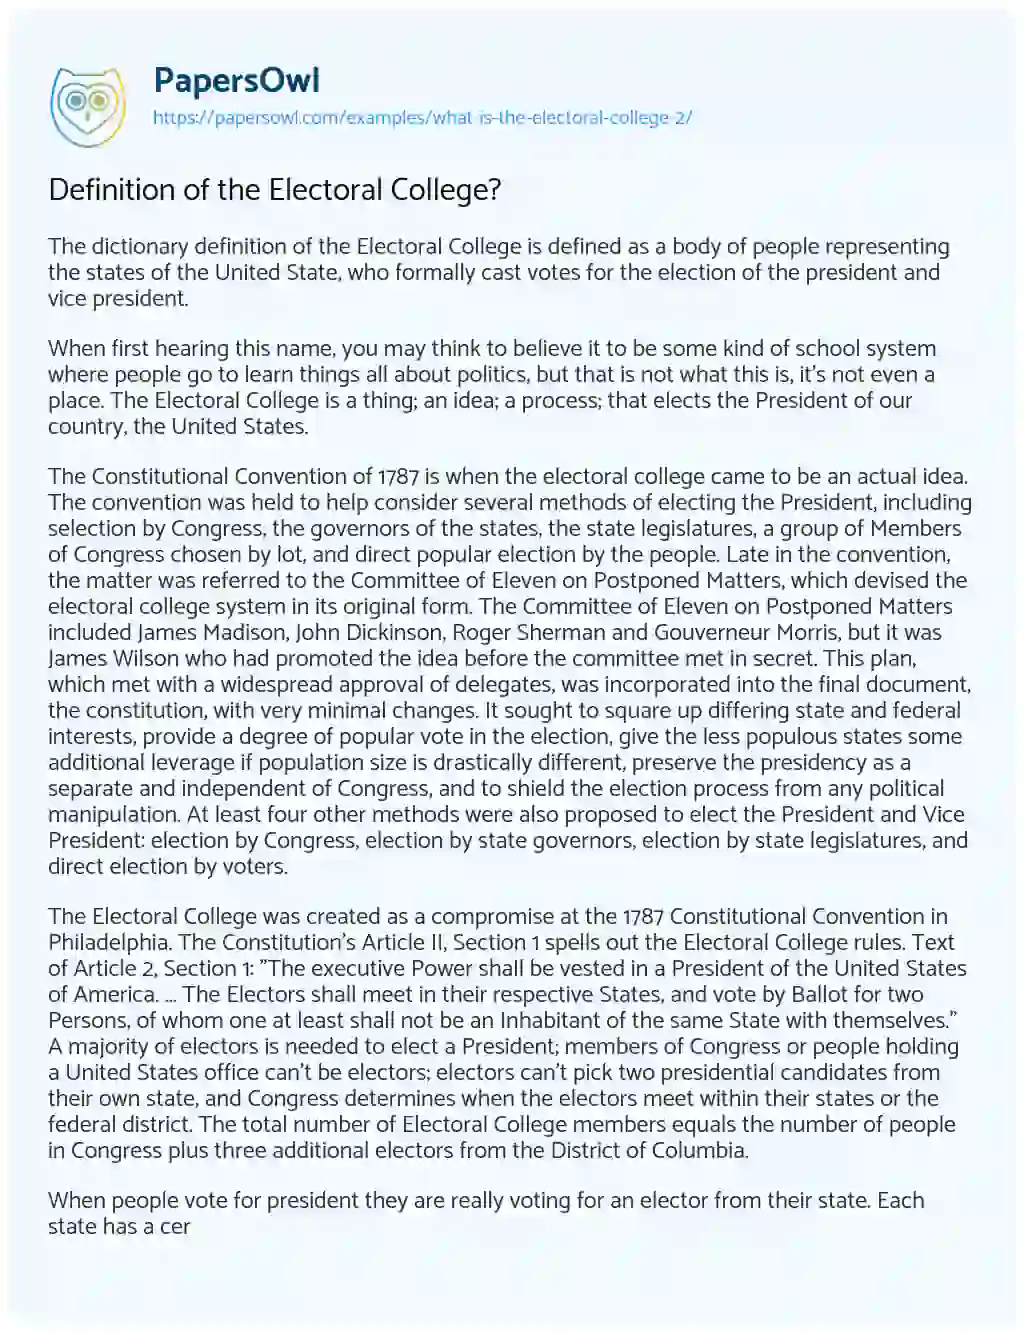 Essay on Definition of the Electoral College?